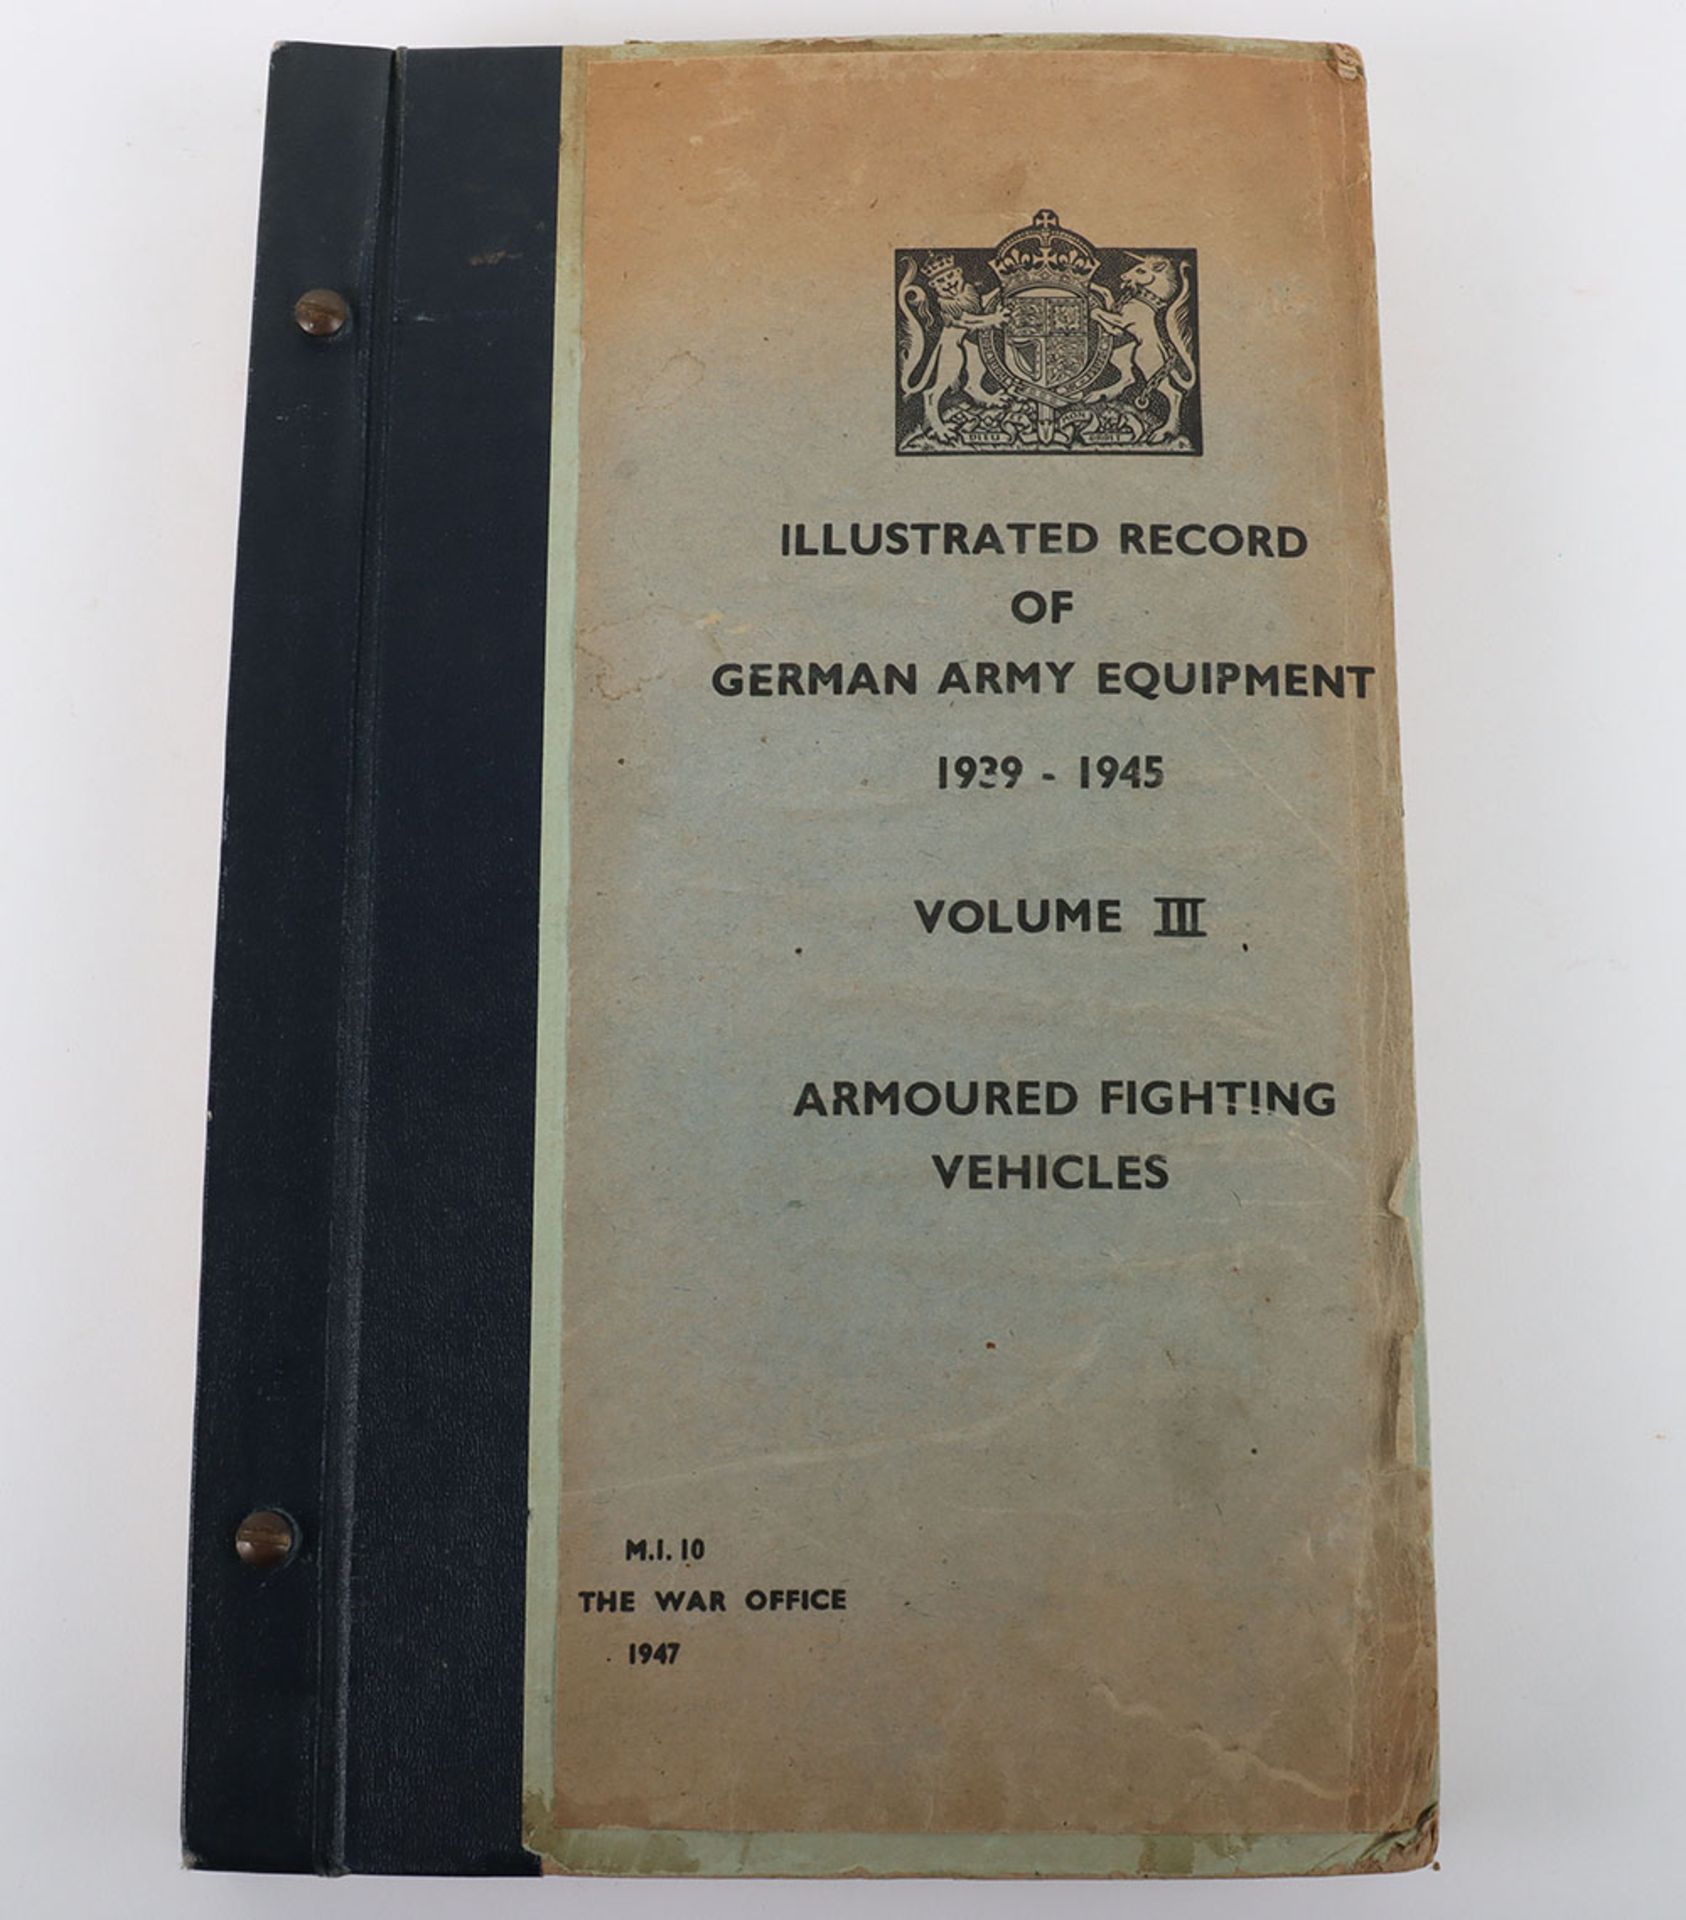 Illustrated Record of German Army Equipment 1939-1945 Volume III Armoured Fighting Vehicles